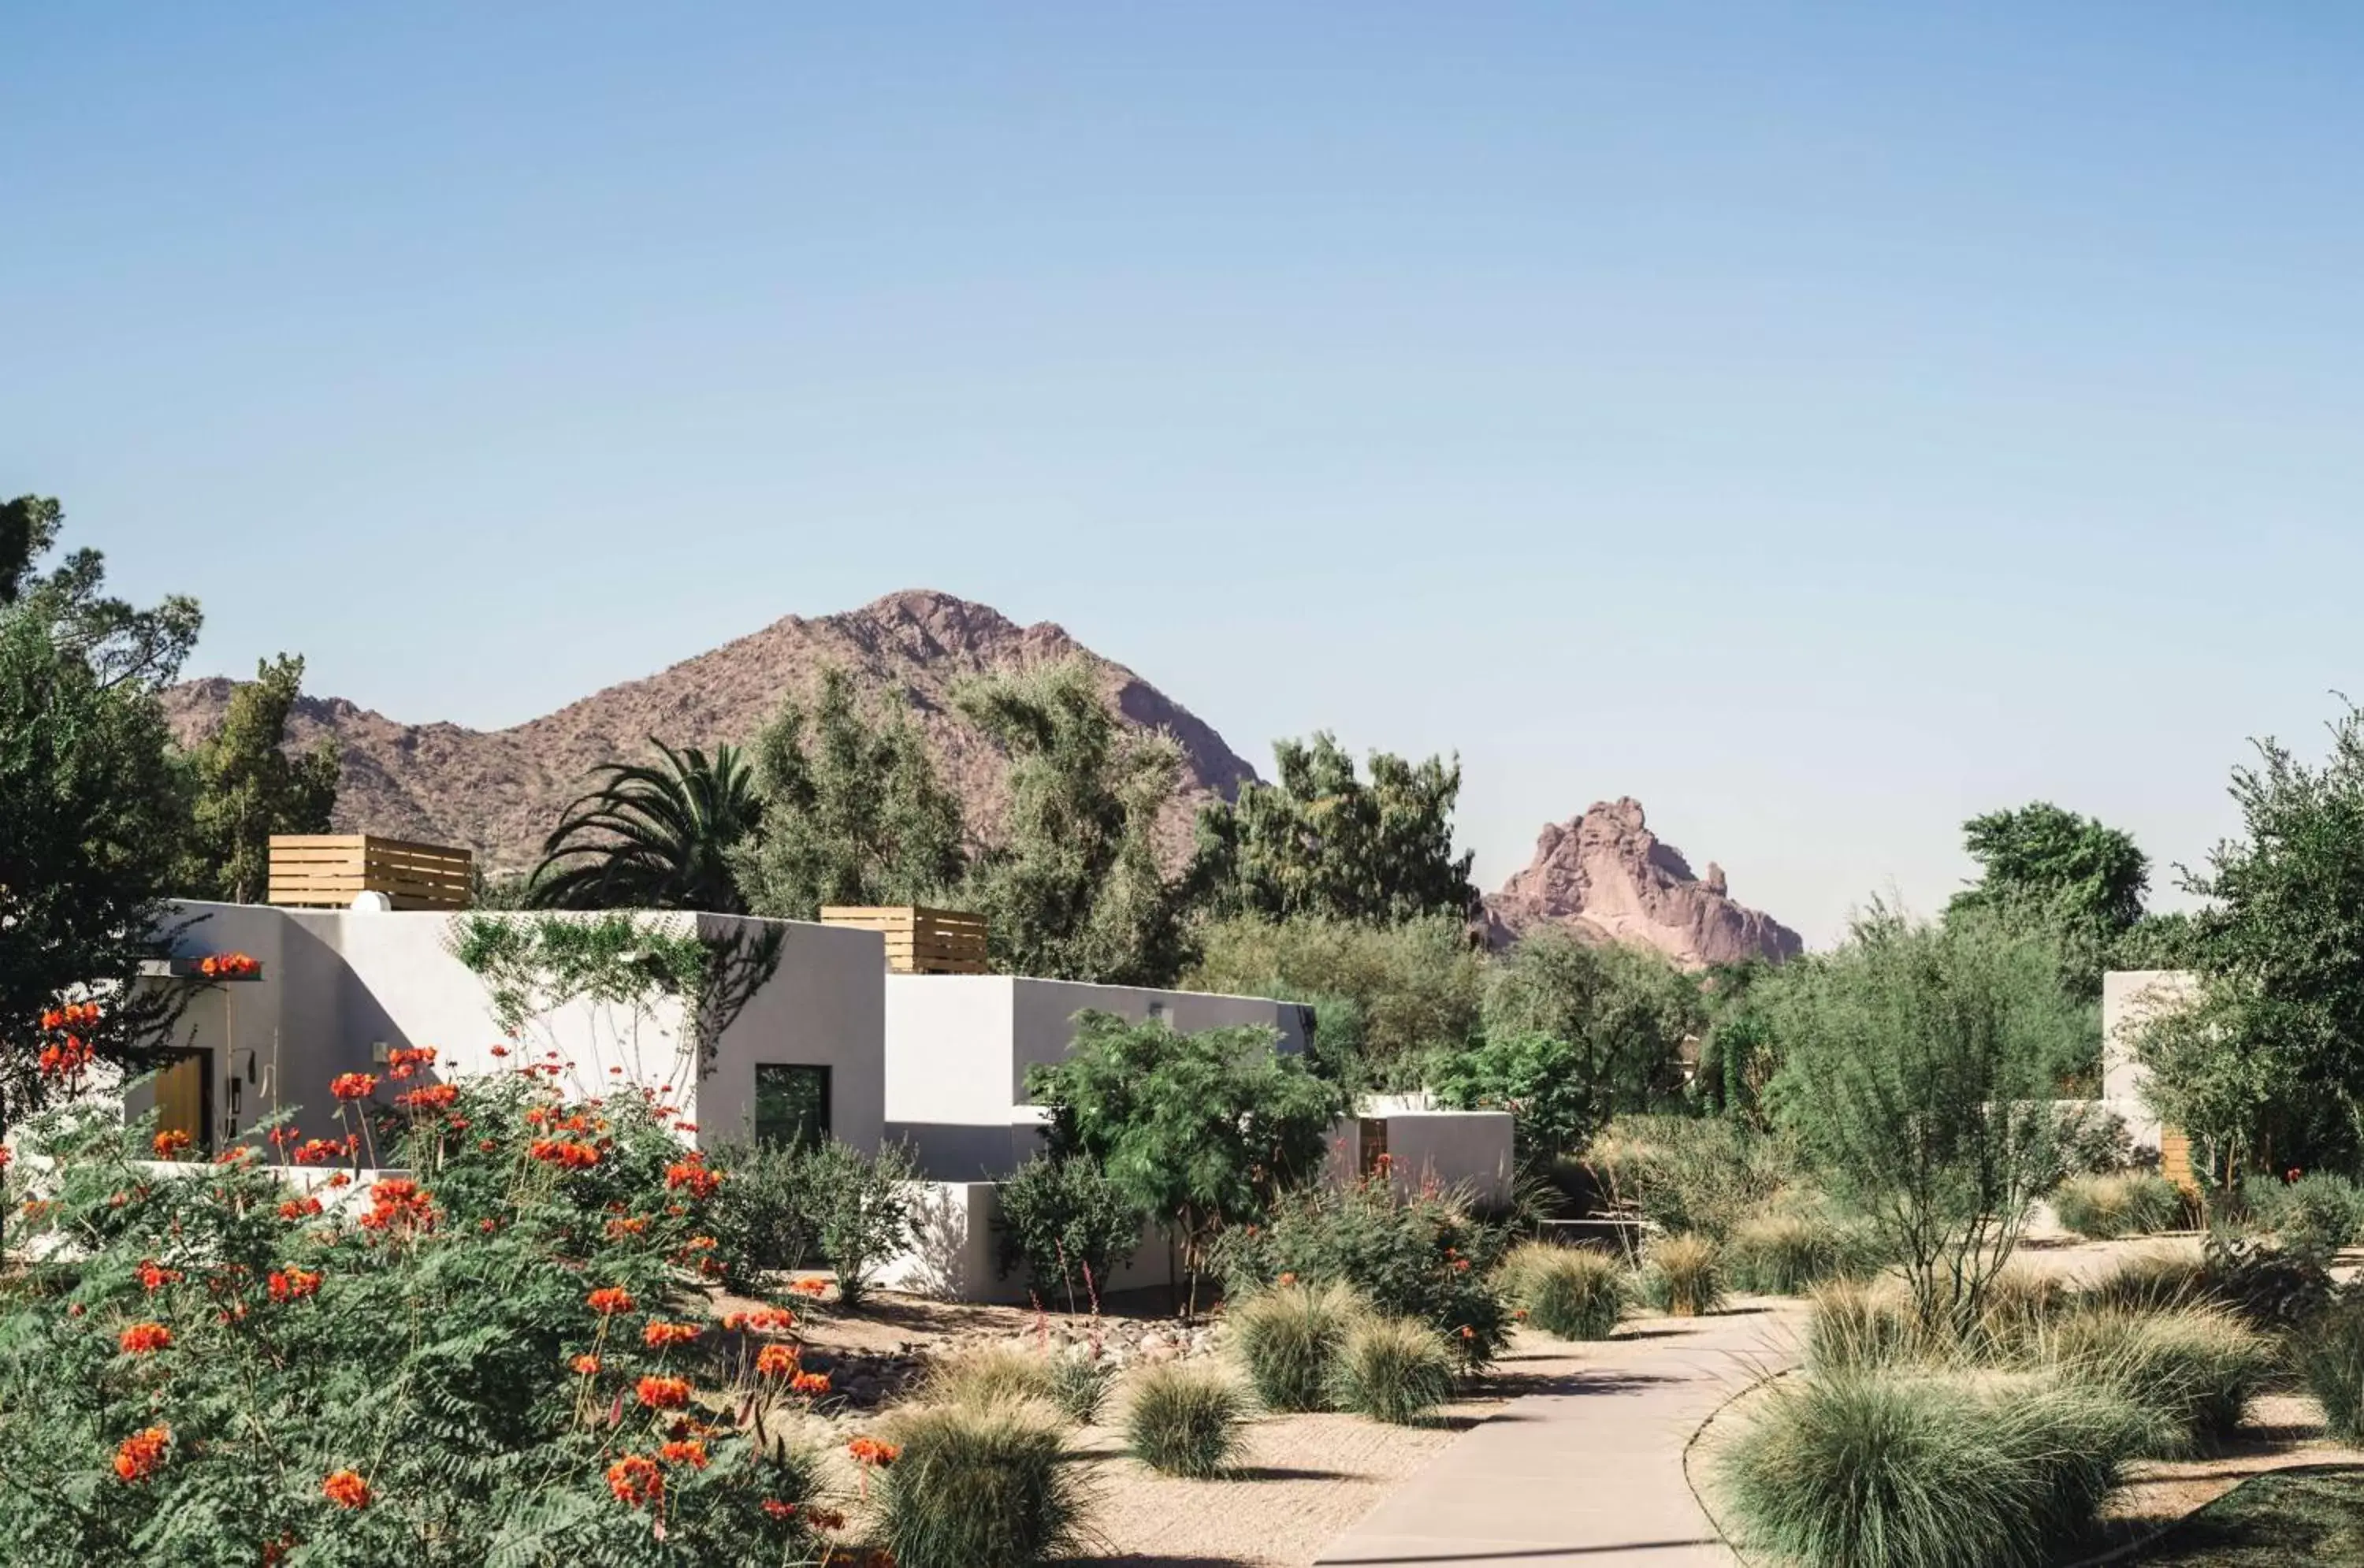 Property building in Andaz Scottsdale Resort & Bungalows